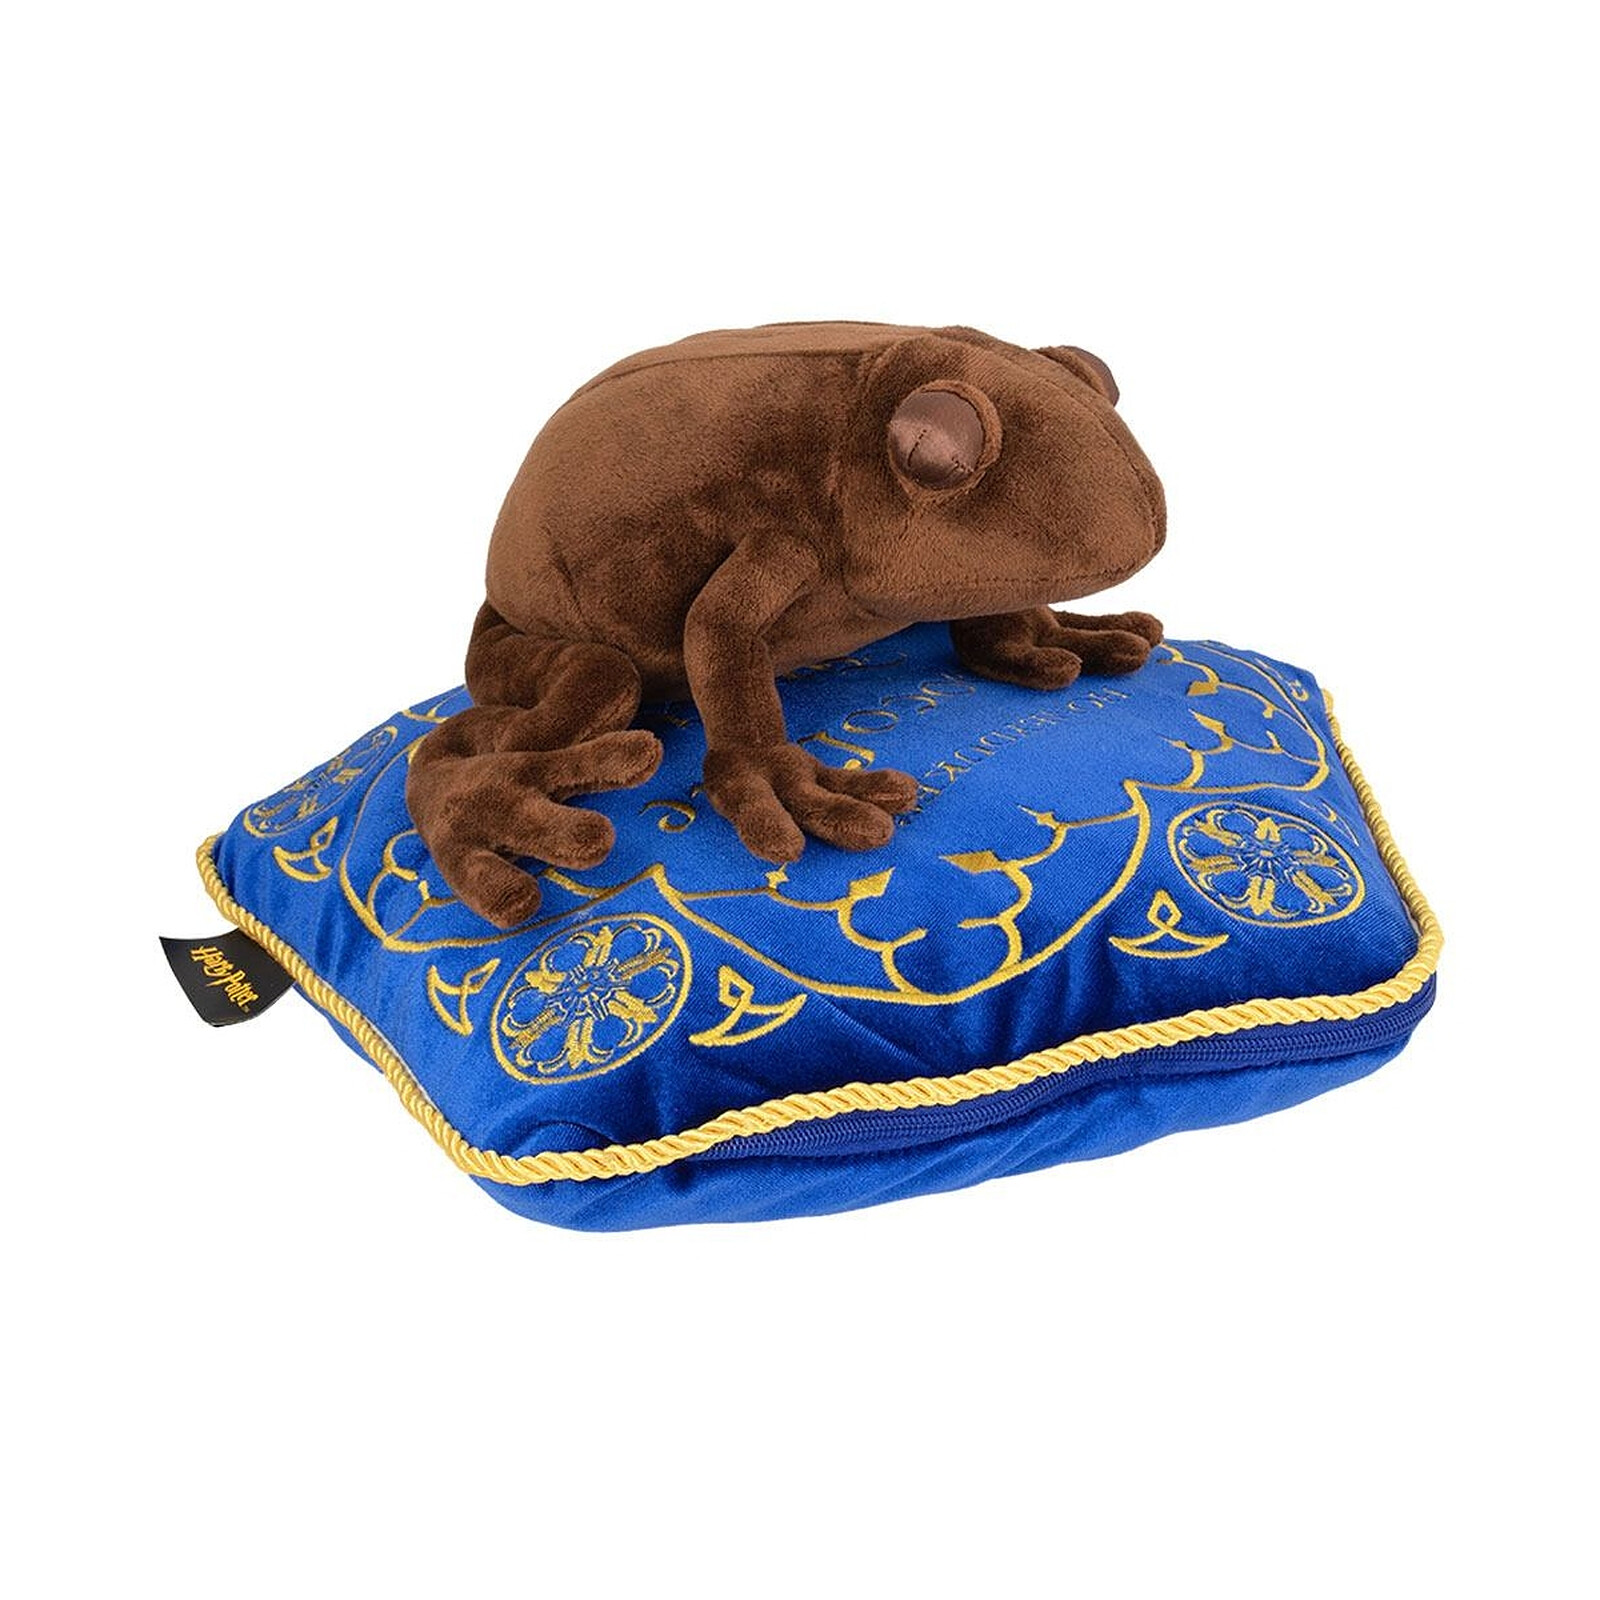 Harry Potter - Peluche Chocolate Frog 30 cm - Peluches - LDLC